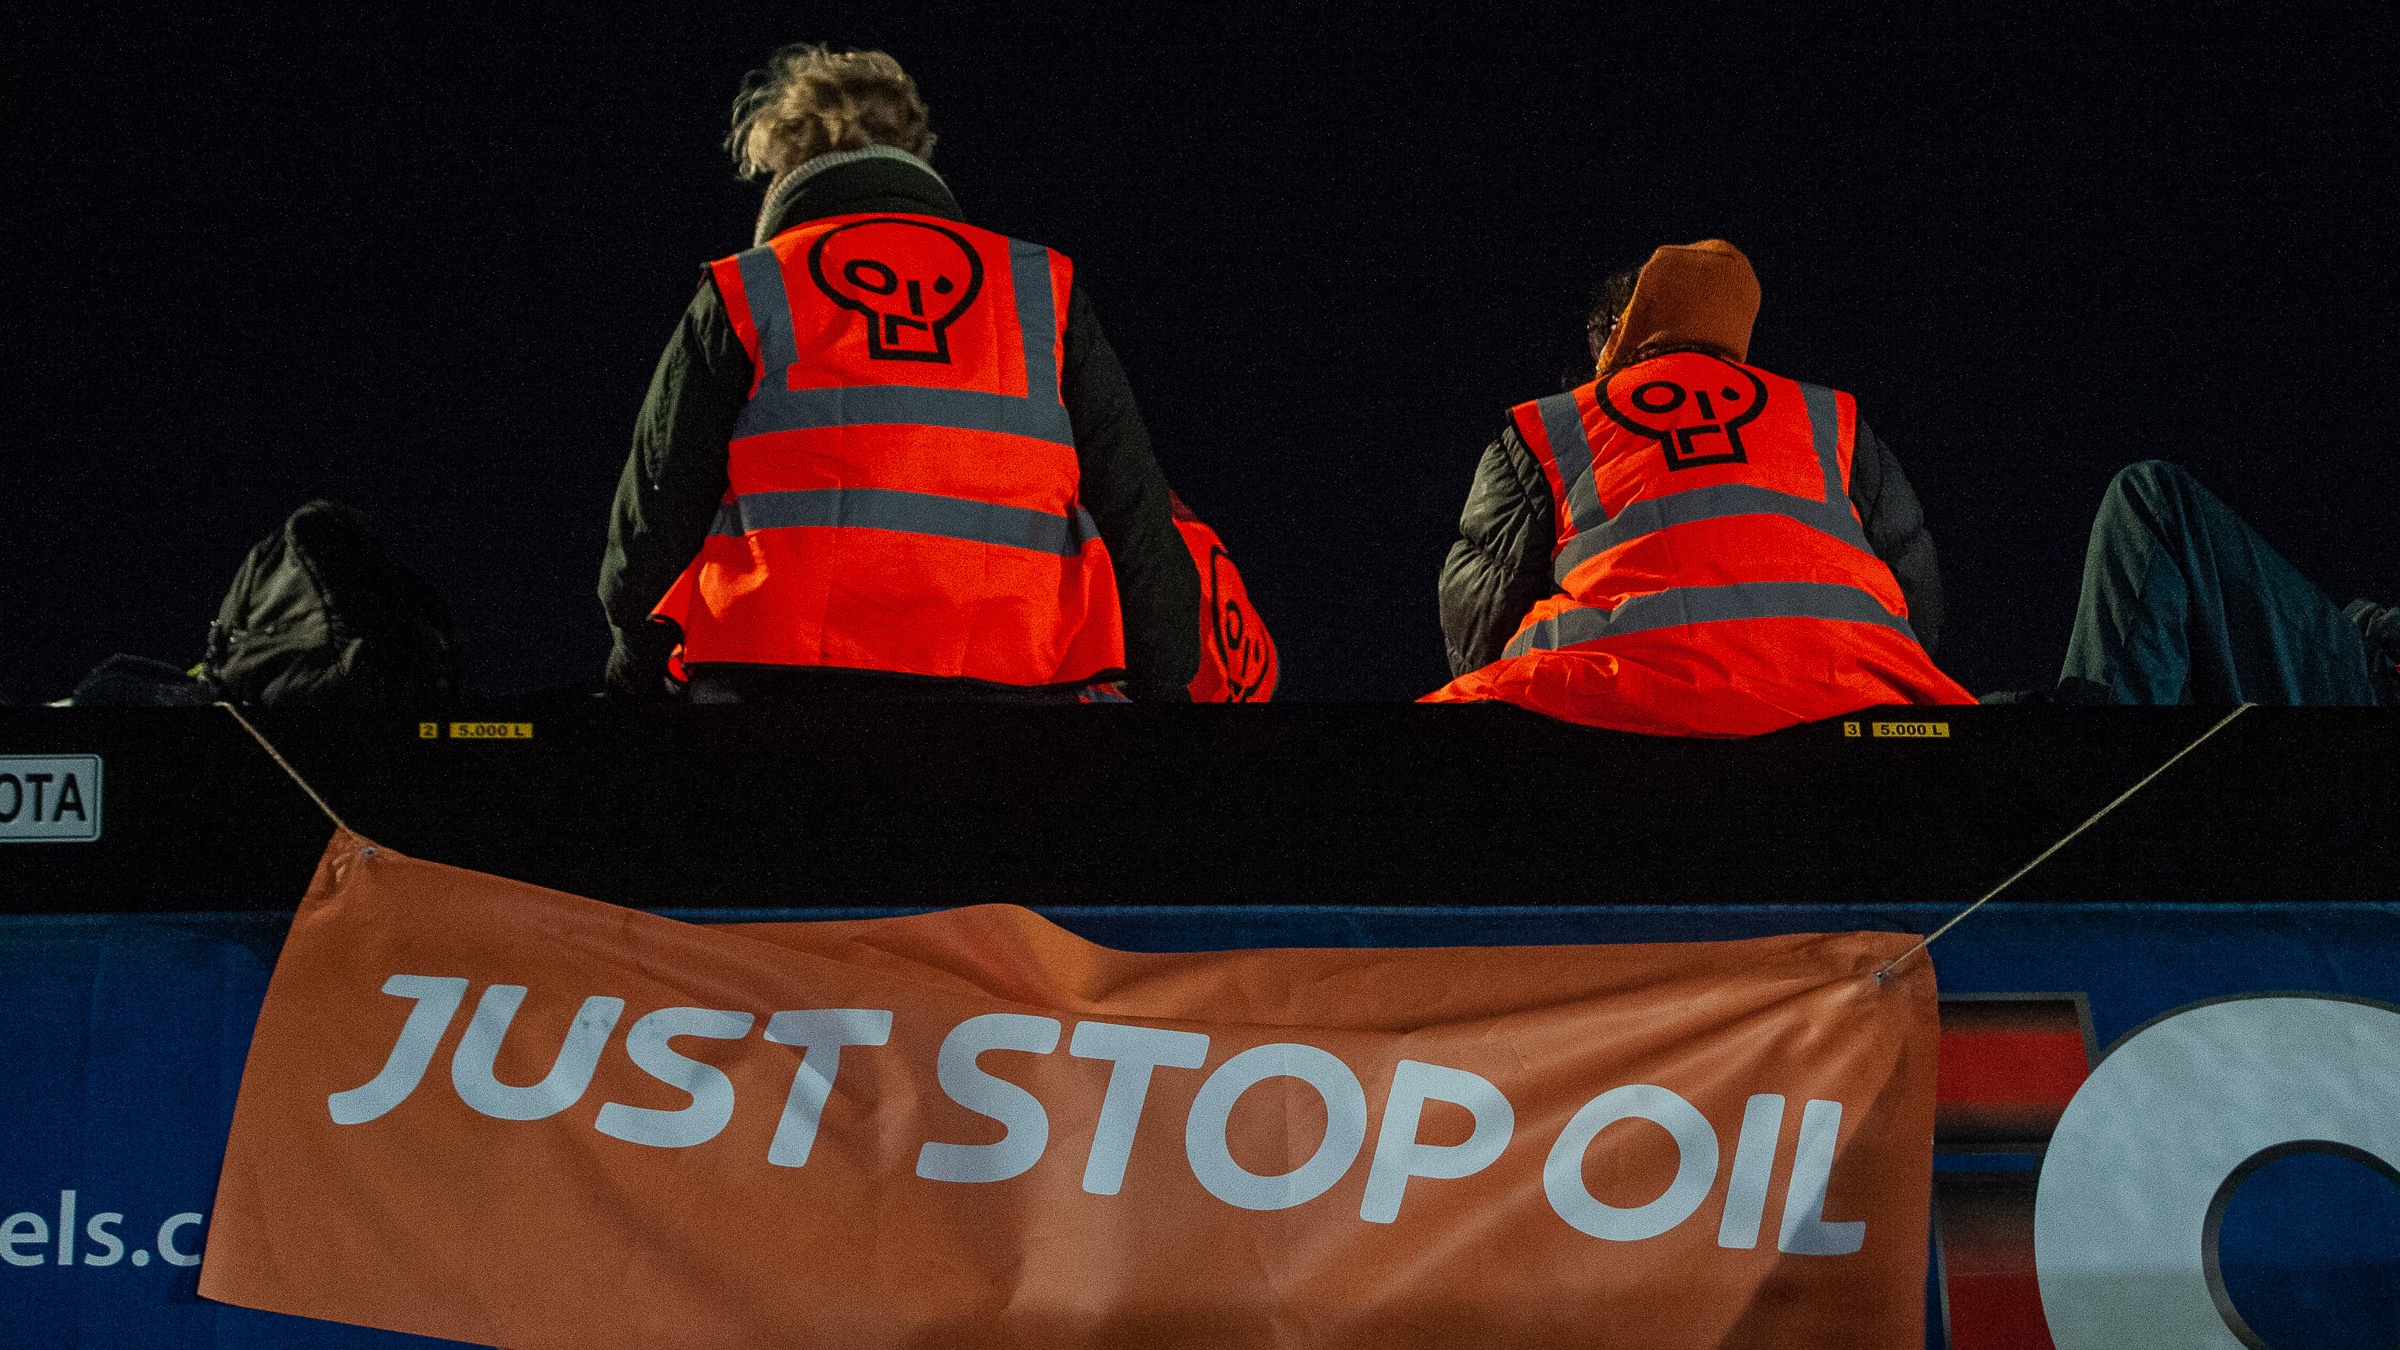 A Just Stop Oil protest